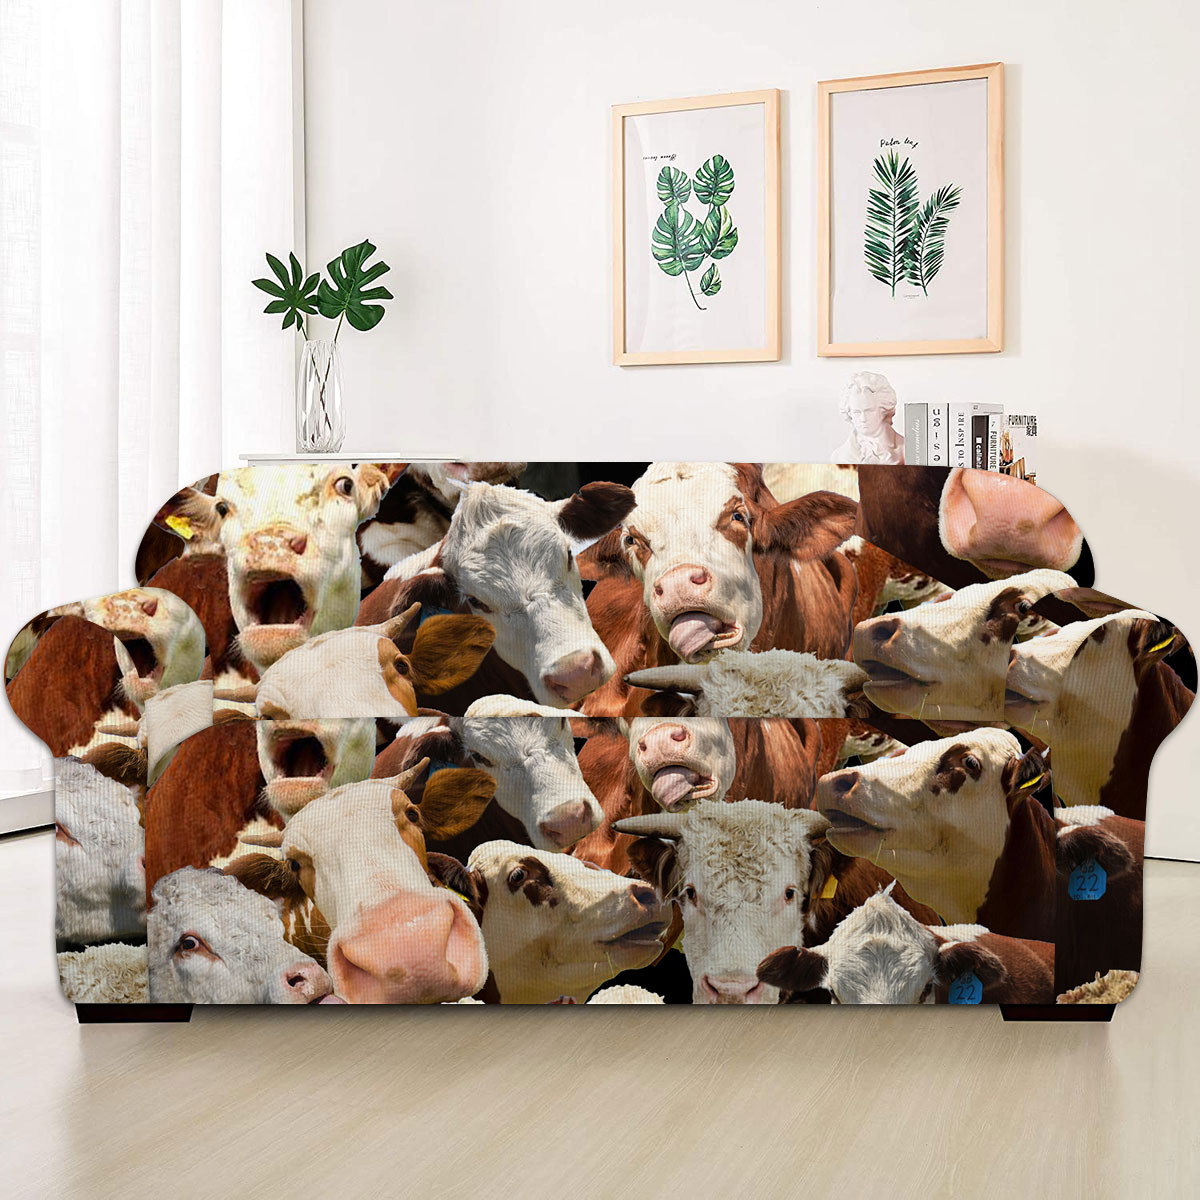 Hereford Herd Pattern Sofa Cover